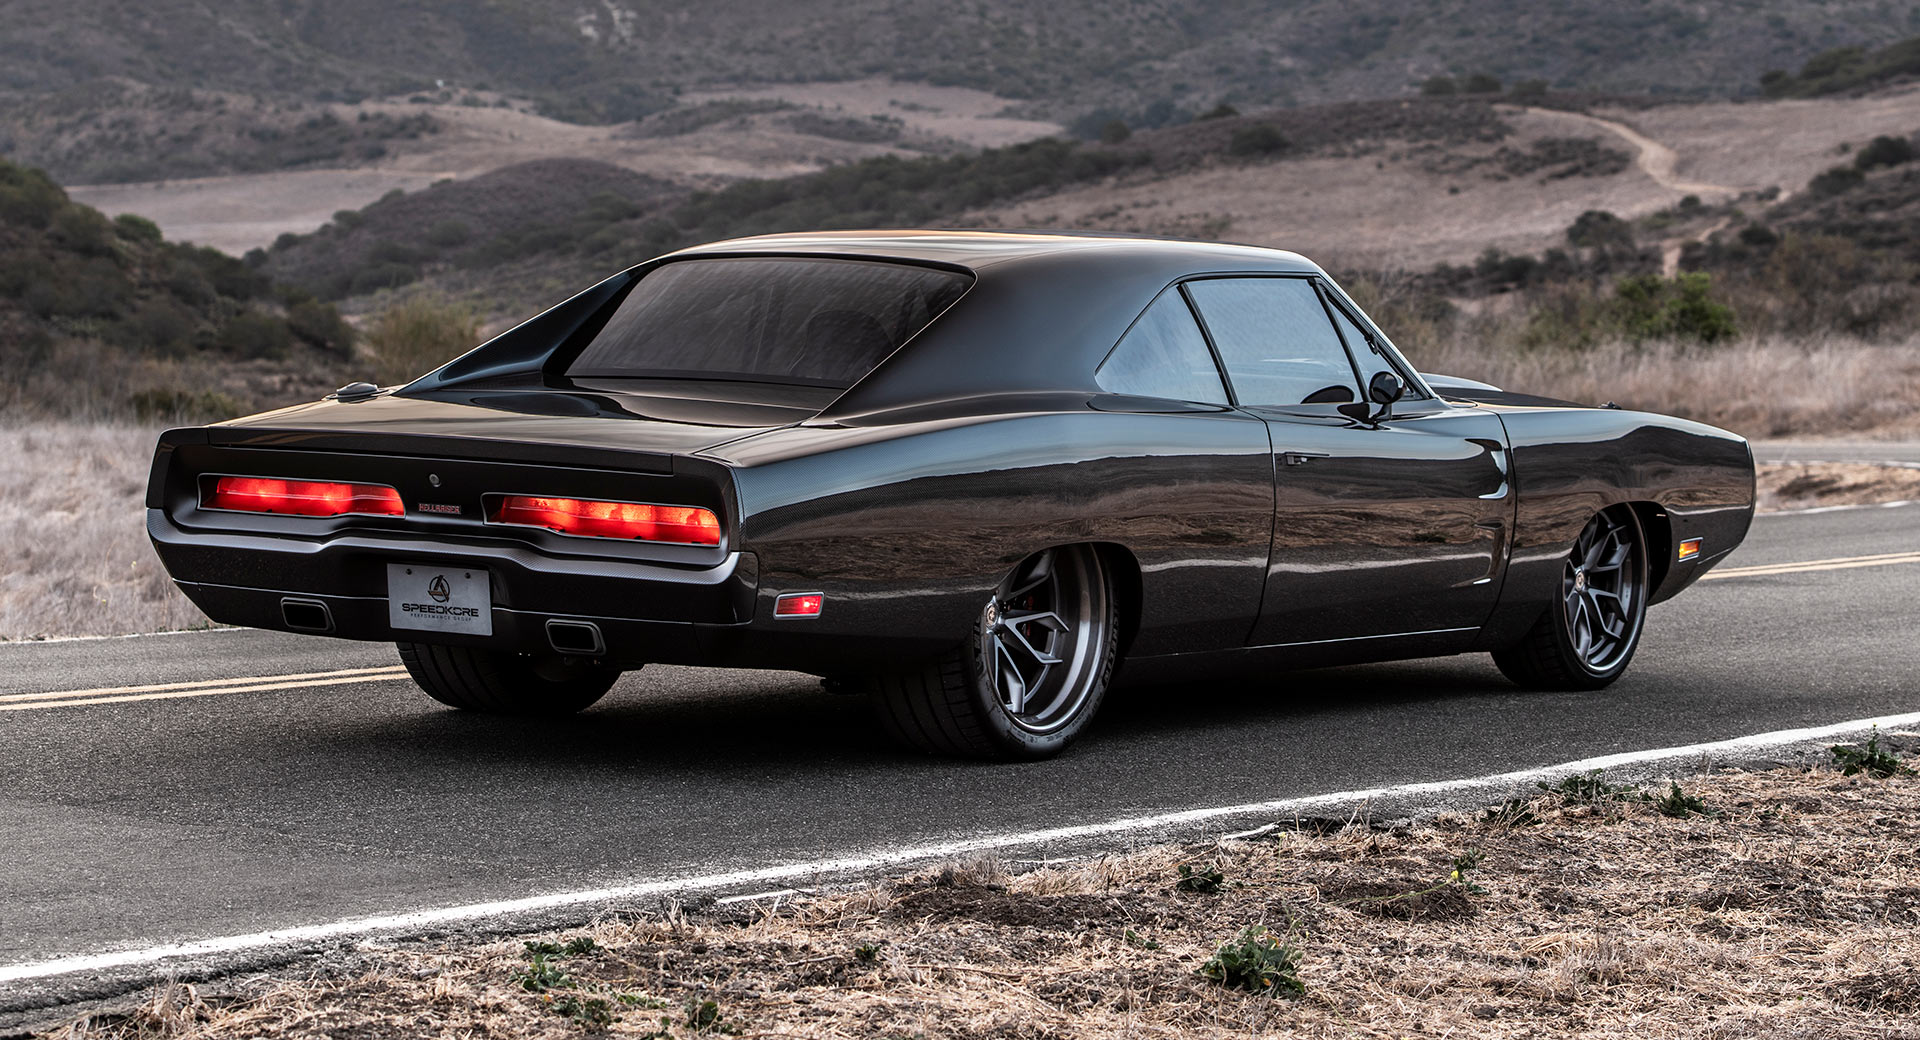 SpeedKore's 1970 Dodge Charger Hellraiser With 1,000 HP Is Bad To The Bone  | Carscoops